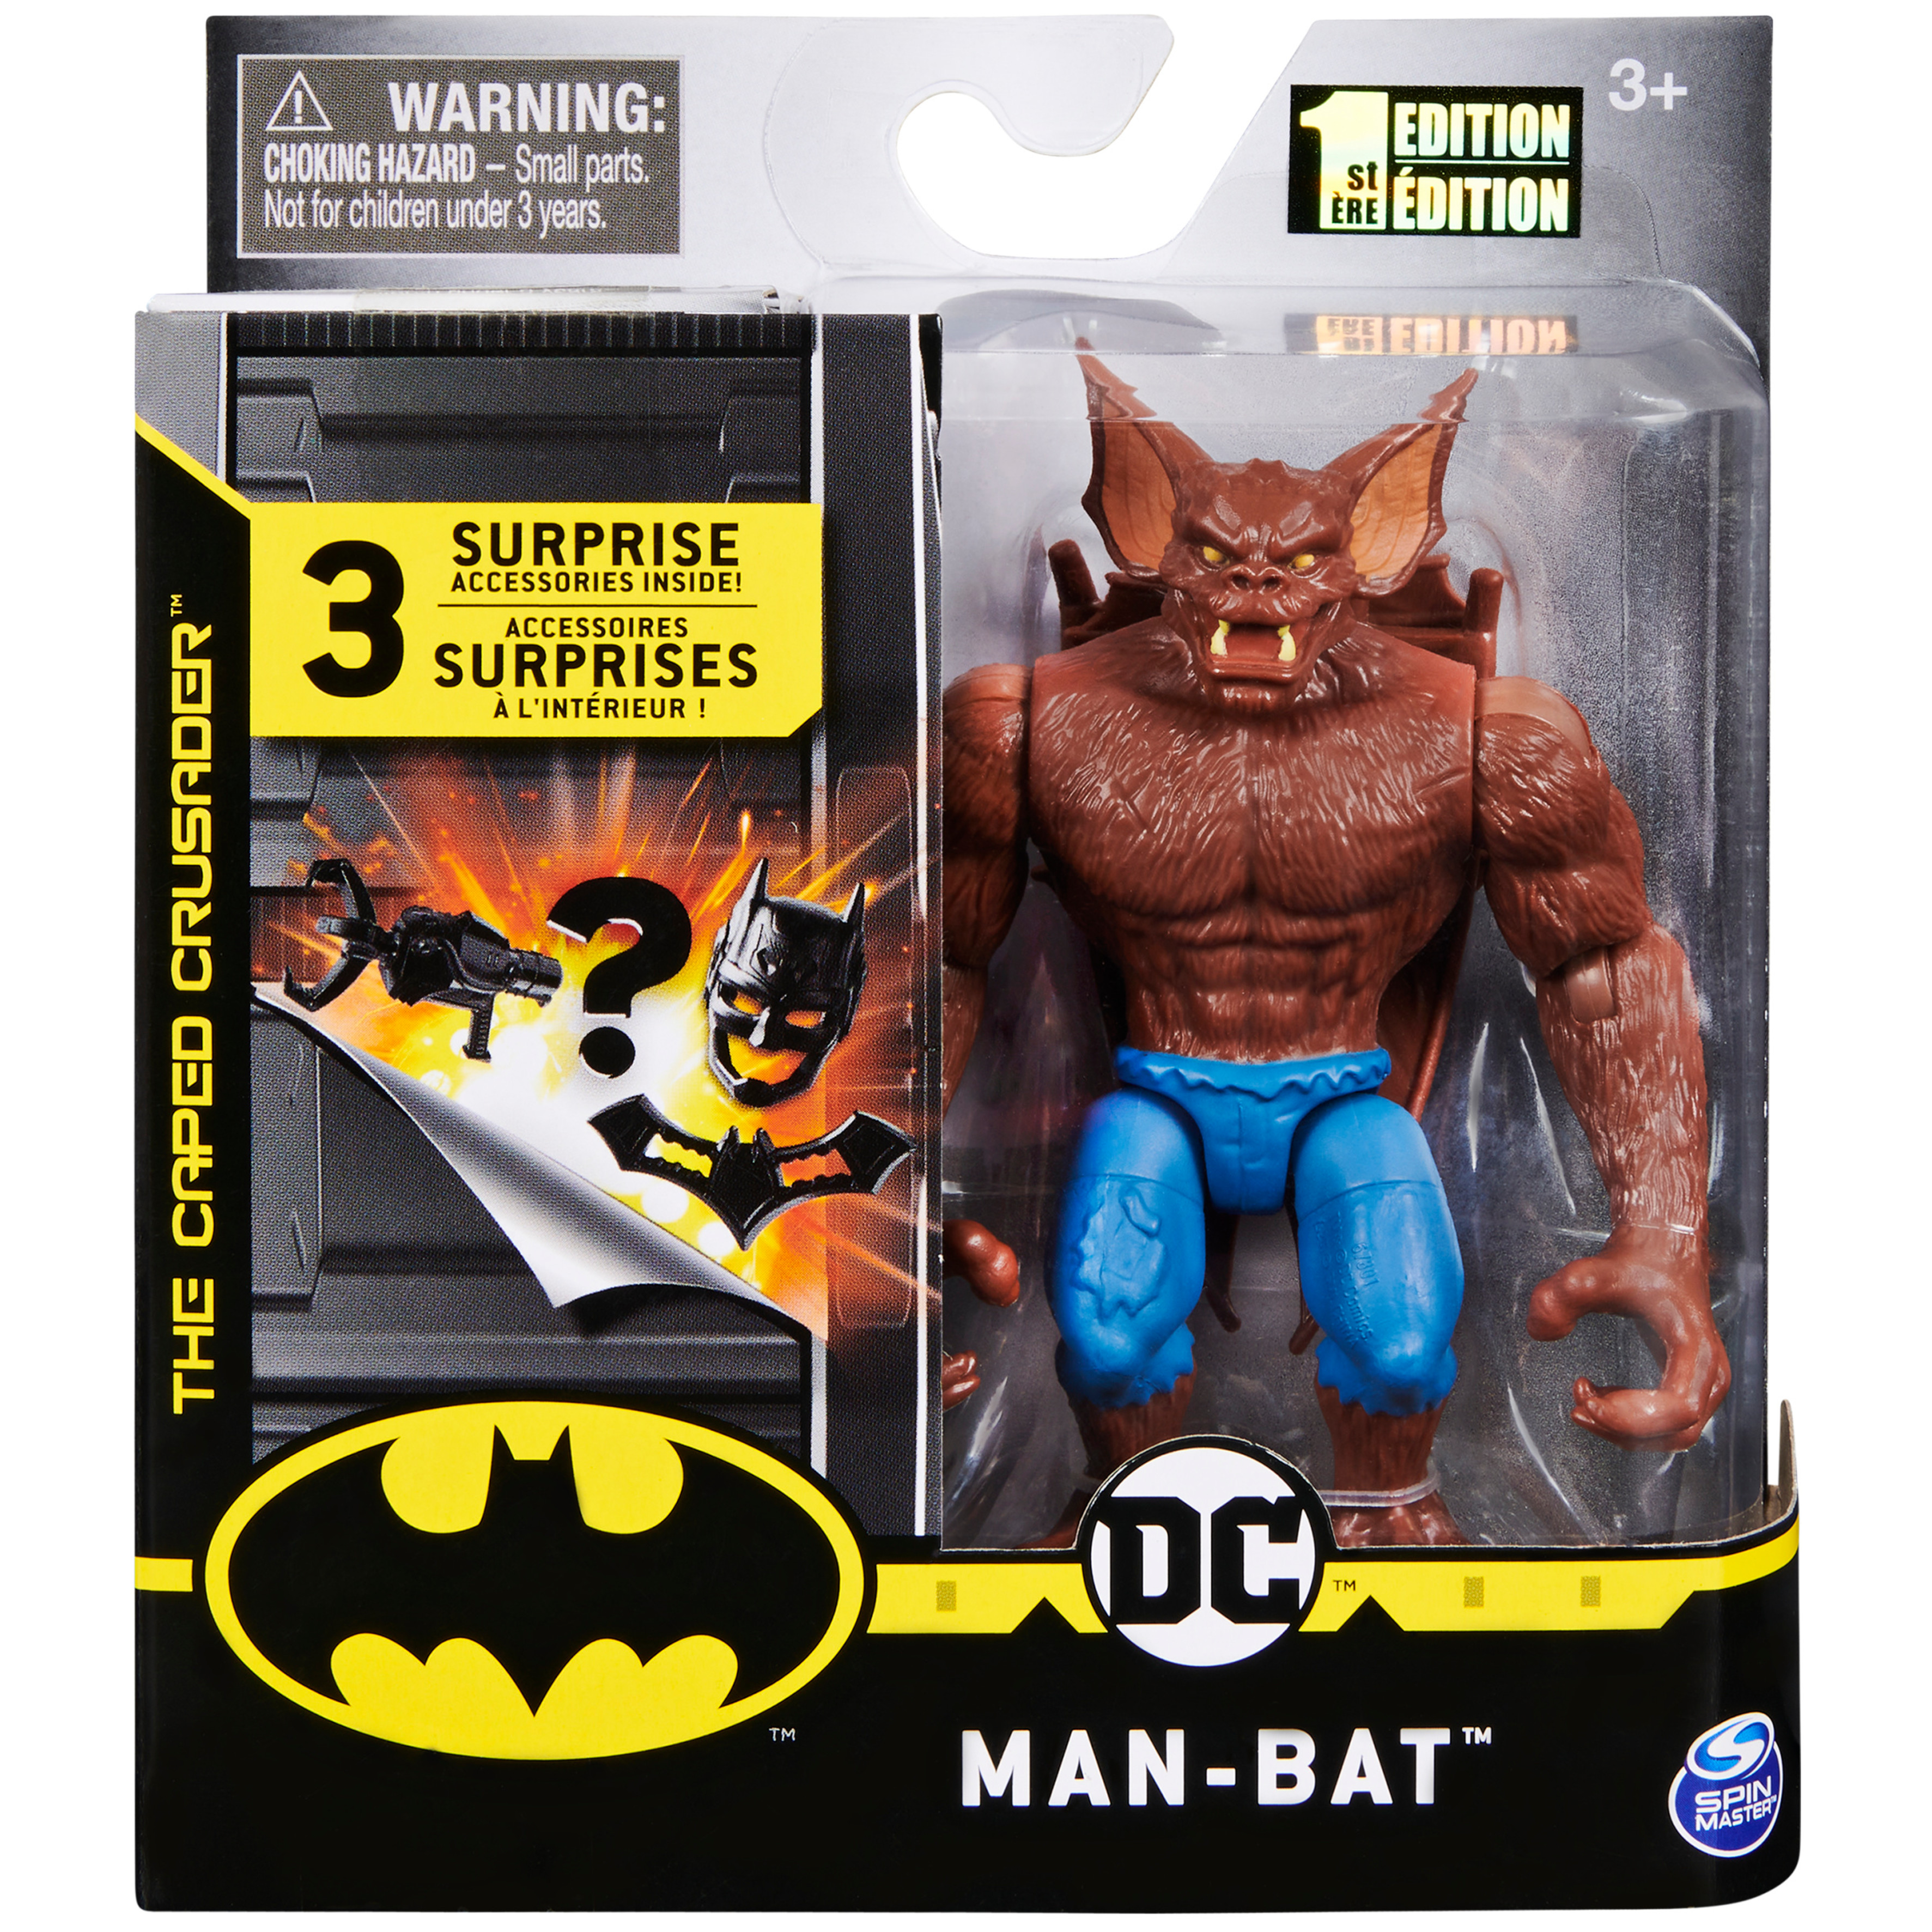 Batman, 4-inch Man-Bat Action Figure with 3 Mystery Accessories, Mission 4 - image 2 of 7